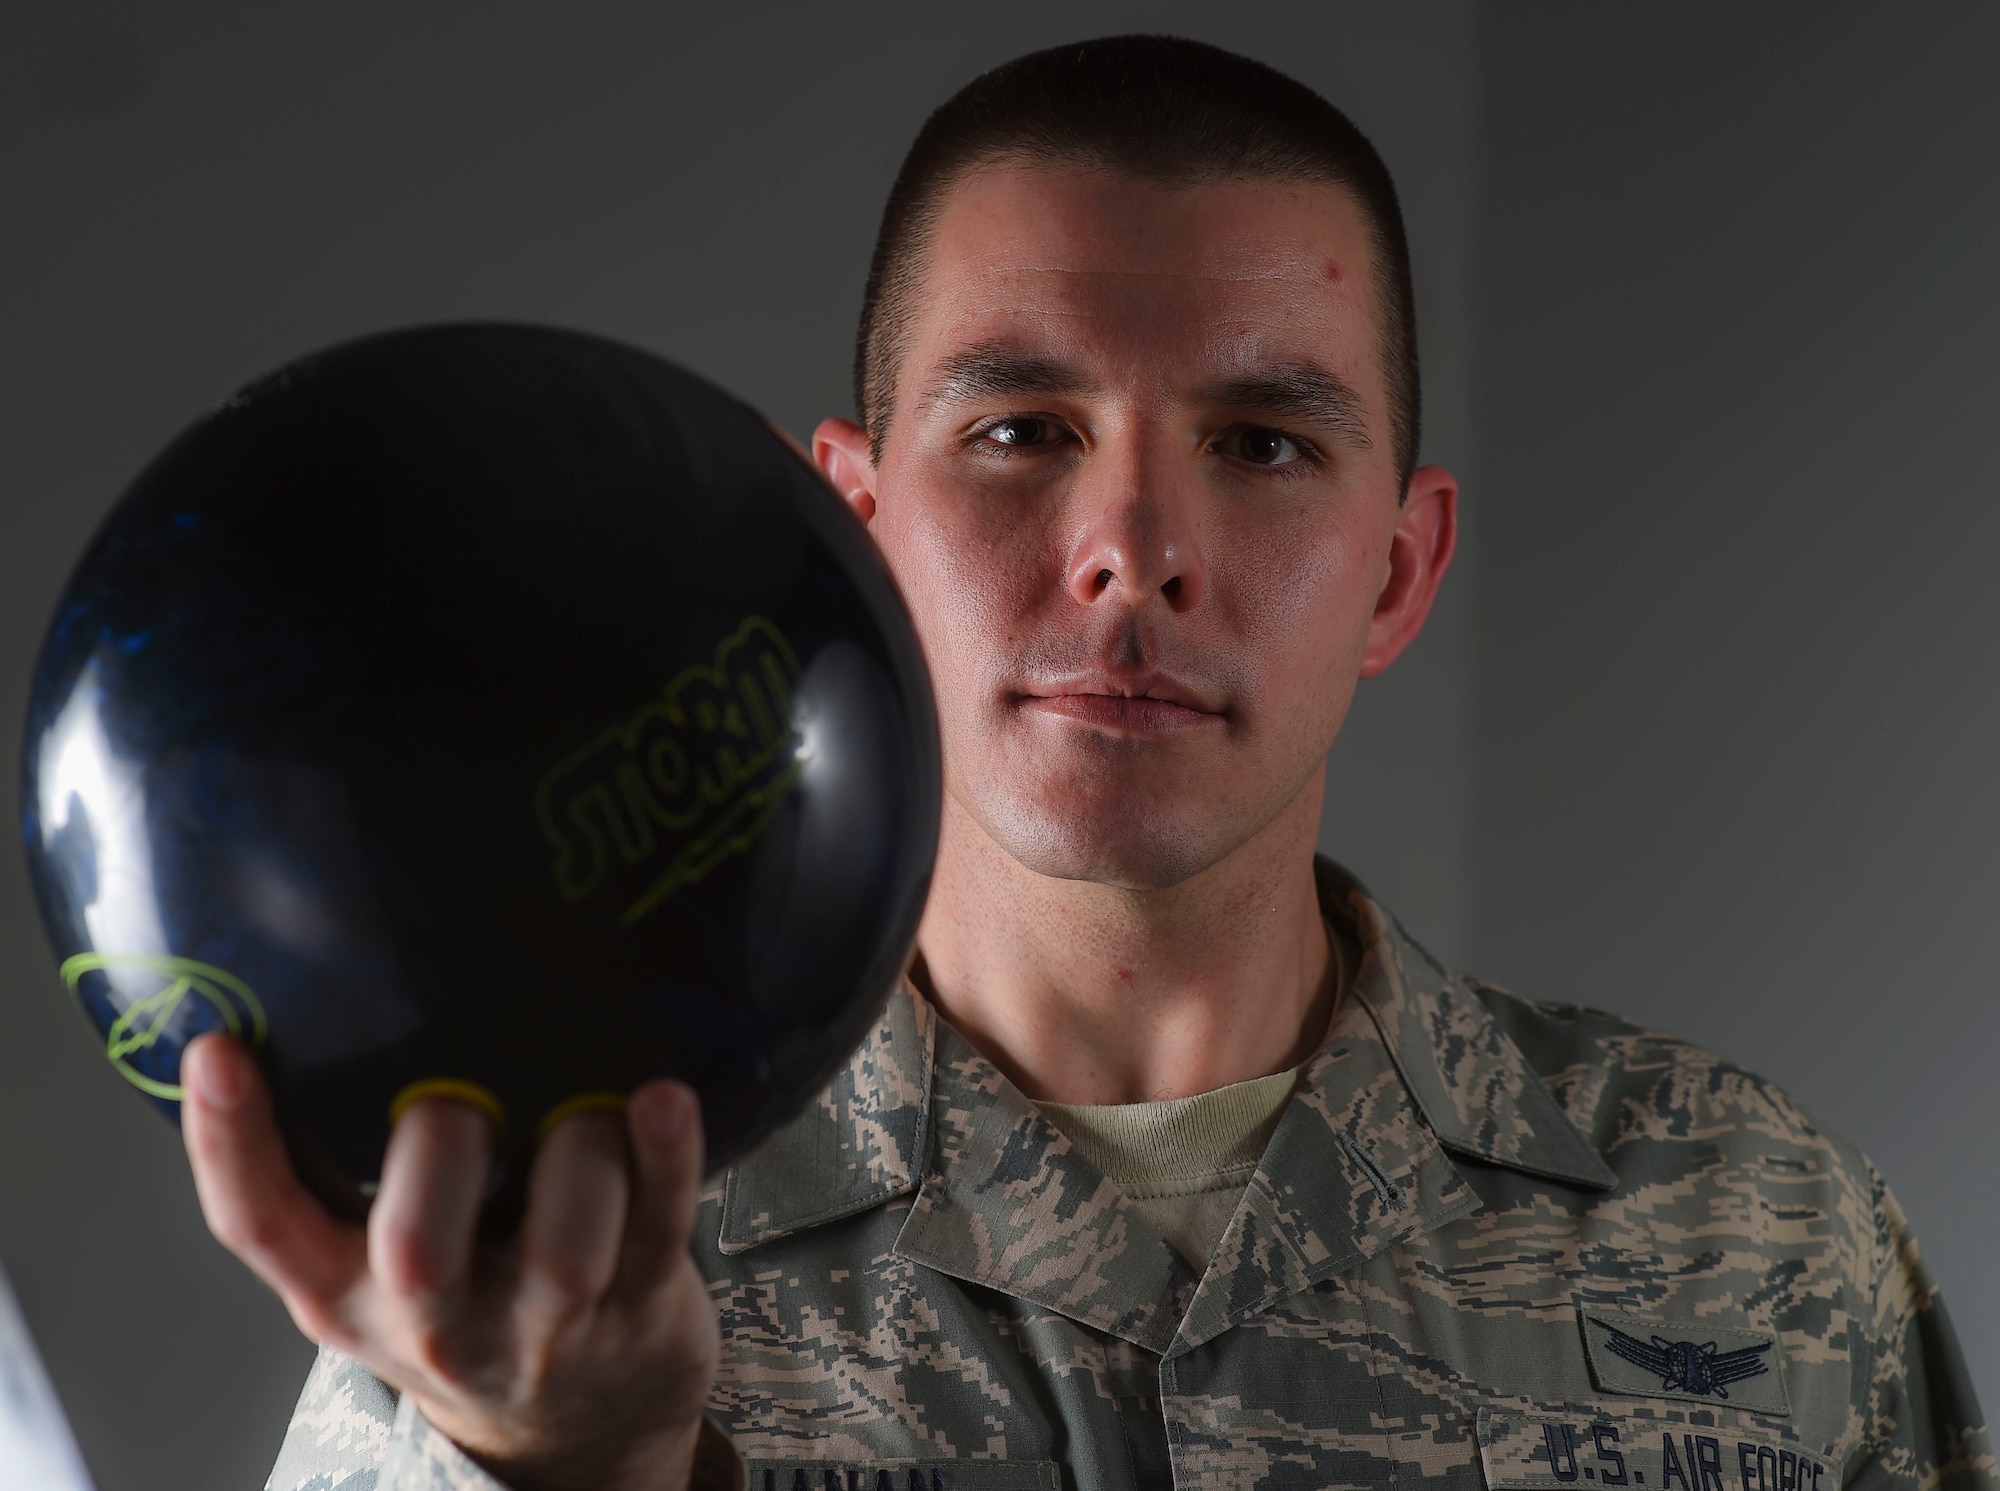 Staff Sgt. William Buchanan competed in the Military Bowling Championship Jan. 16-25, 2015, in Las Vegas, Nevada. Buchanan and his bowling team took 15th place out of 262 other teams during the championship. Buchanan is a 2nd Space Warning Squadron space operator. (U.S. Air Force photo/Airman 1st Class Samantha Saulsbury)